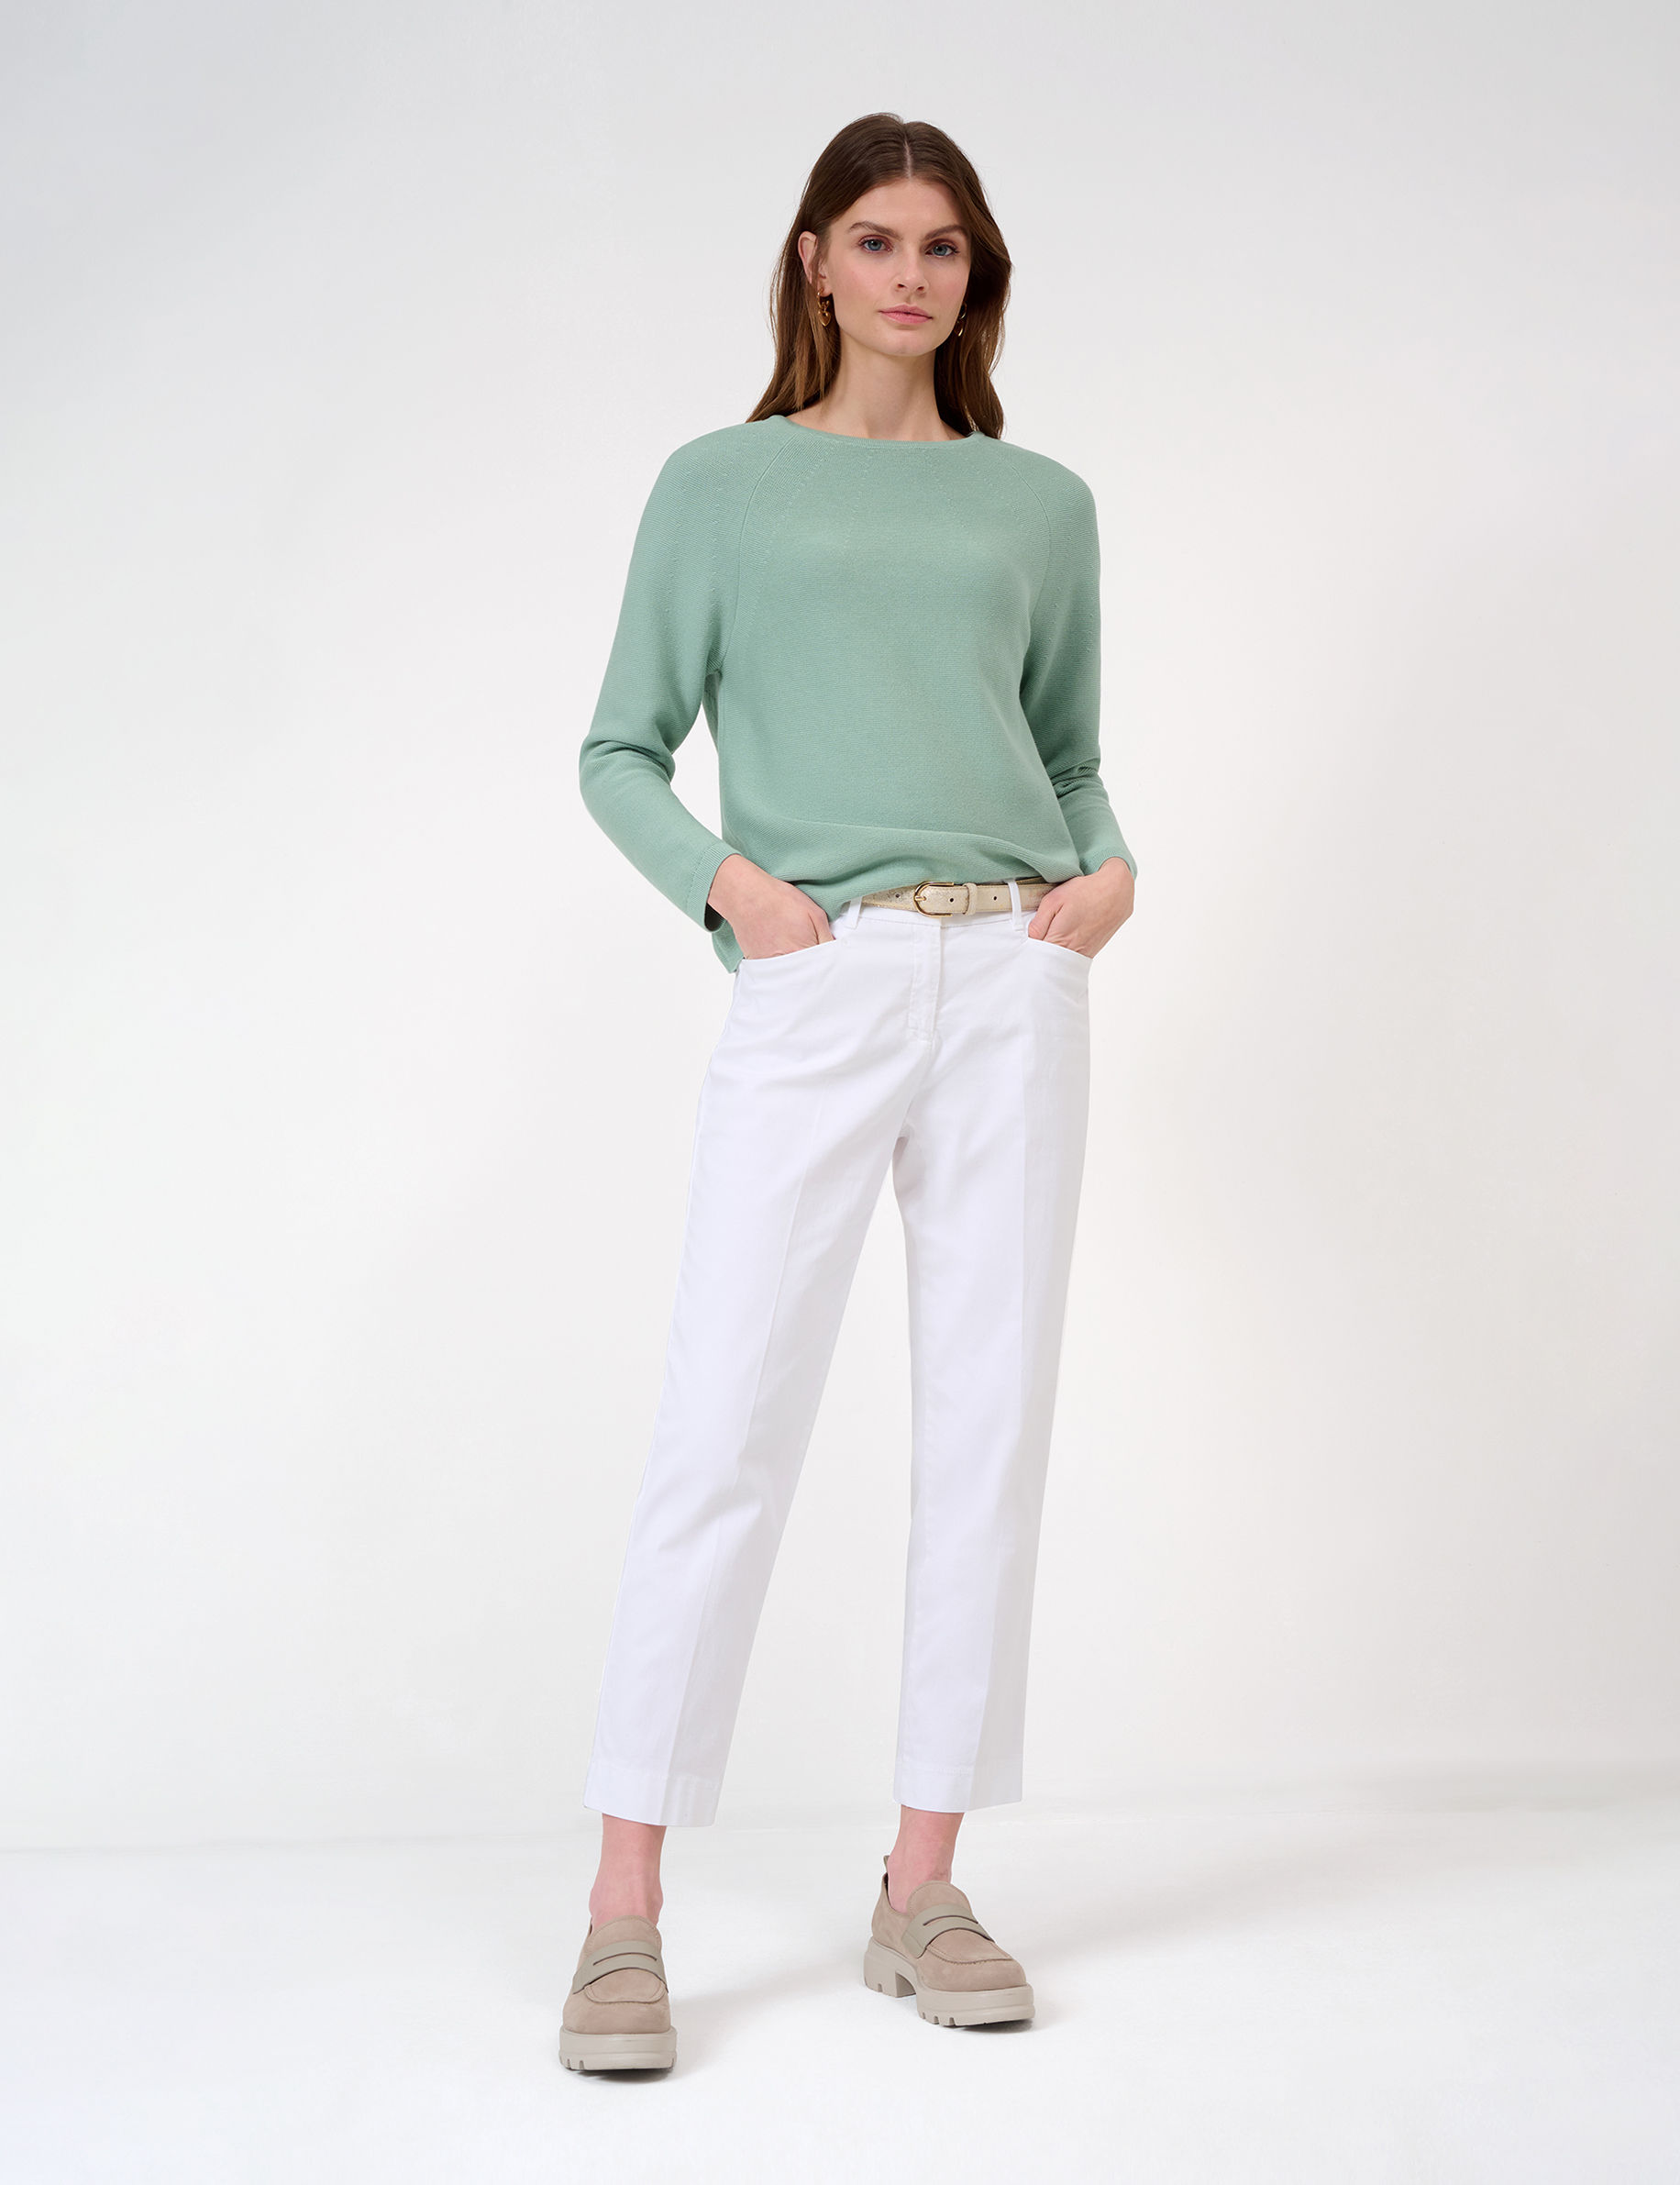 Women Style LESLEY mint  Model Outfit